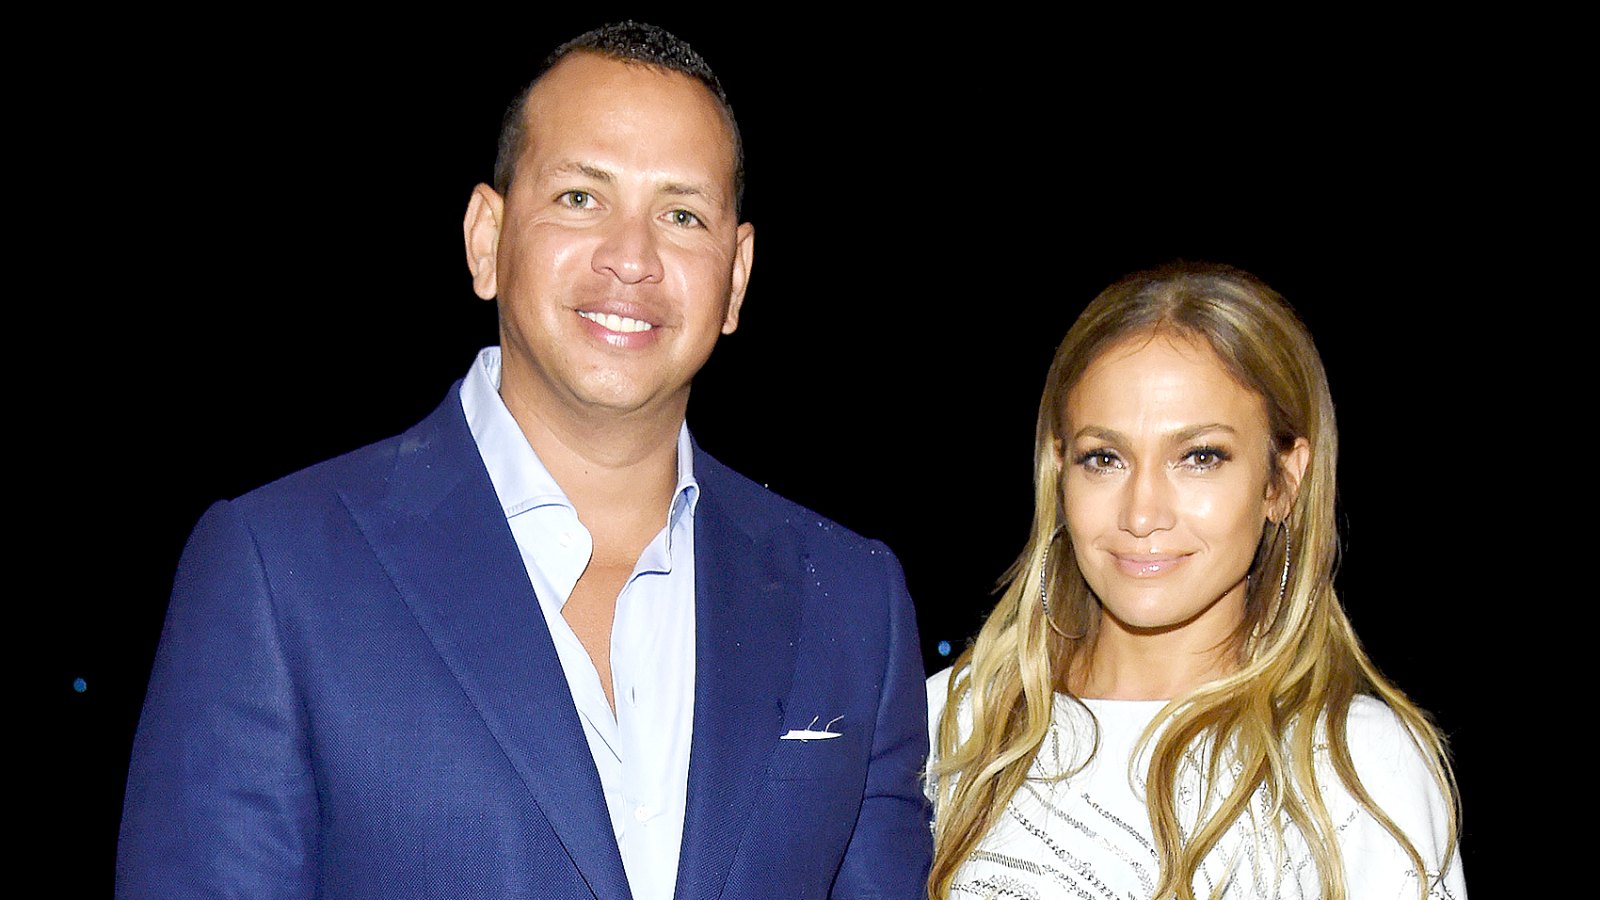 Alex Rodriguez and Jennifer Lopez attend Apollo in the Hamptons 2017: hosted by Ronald O. Perelman at The Creeks on August 12, 2017 in East Hampton, New York.